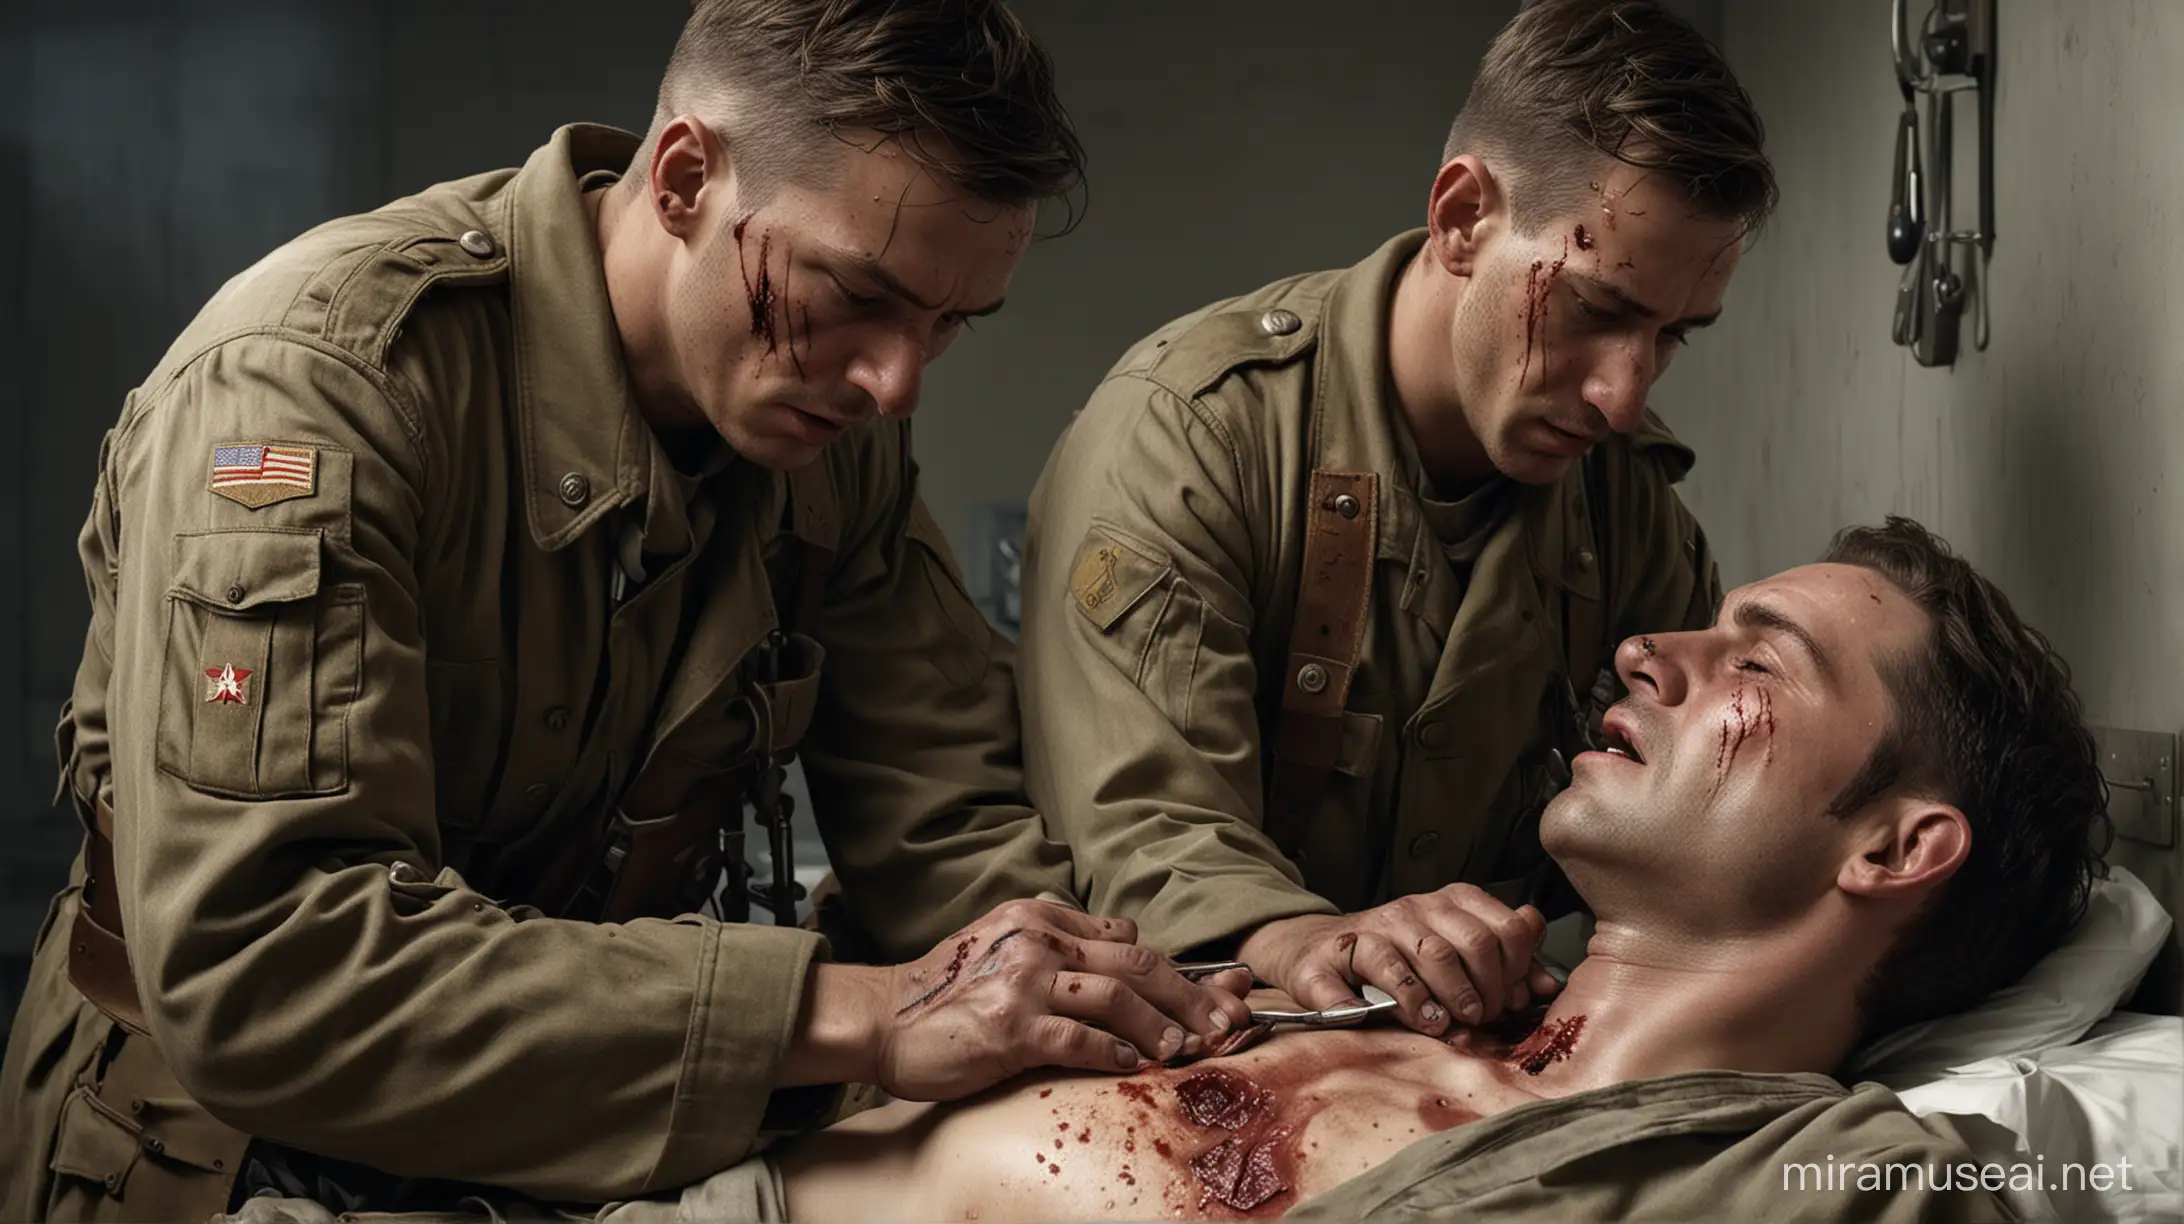 WWII Soldier Receiving Medical Treatment Agonized Expression and Dramatic Atmosphere